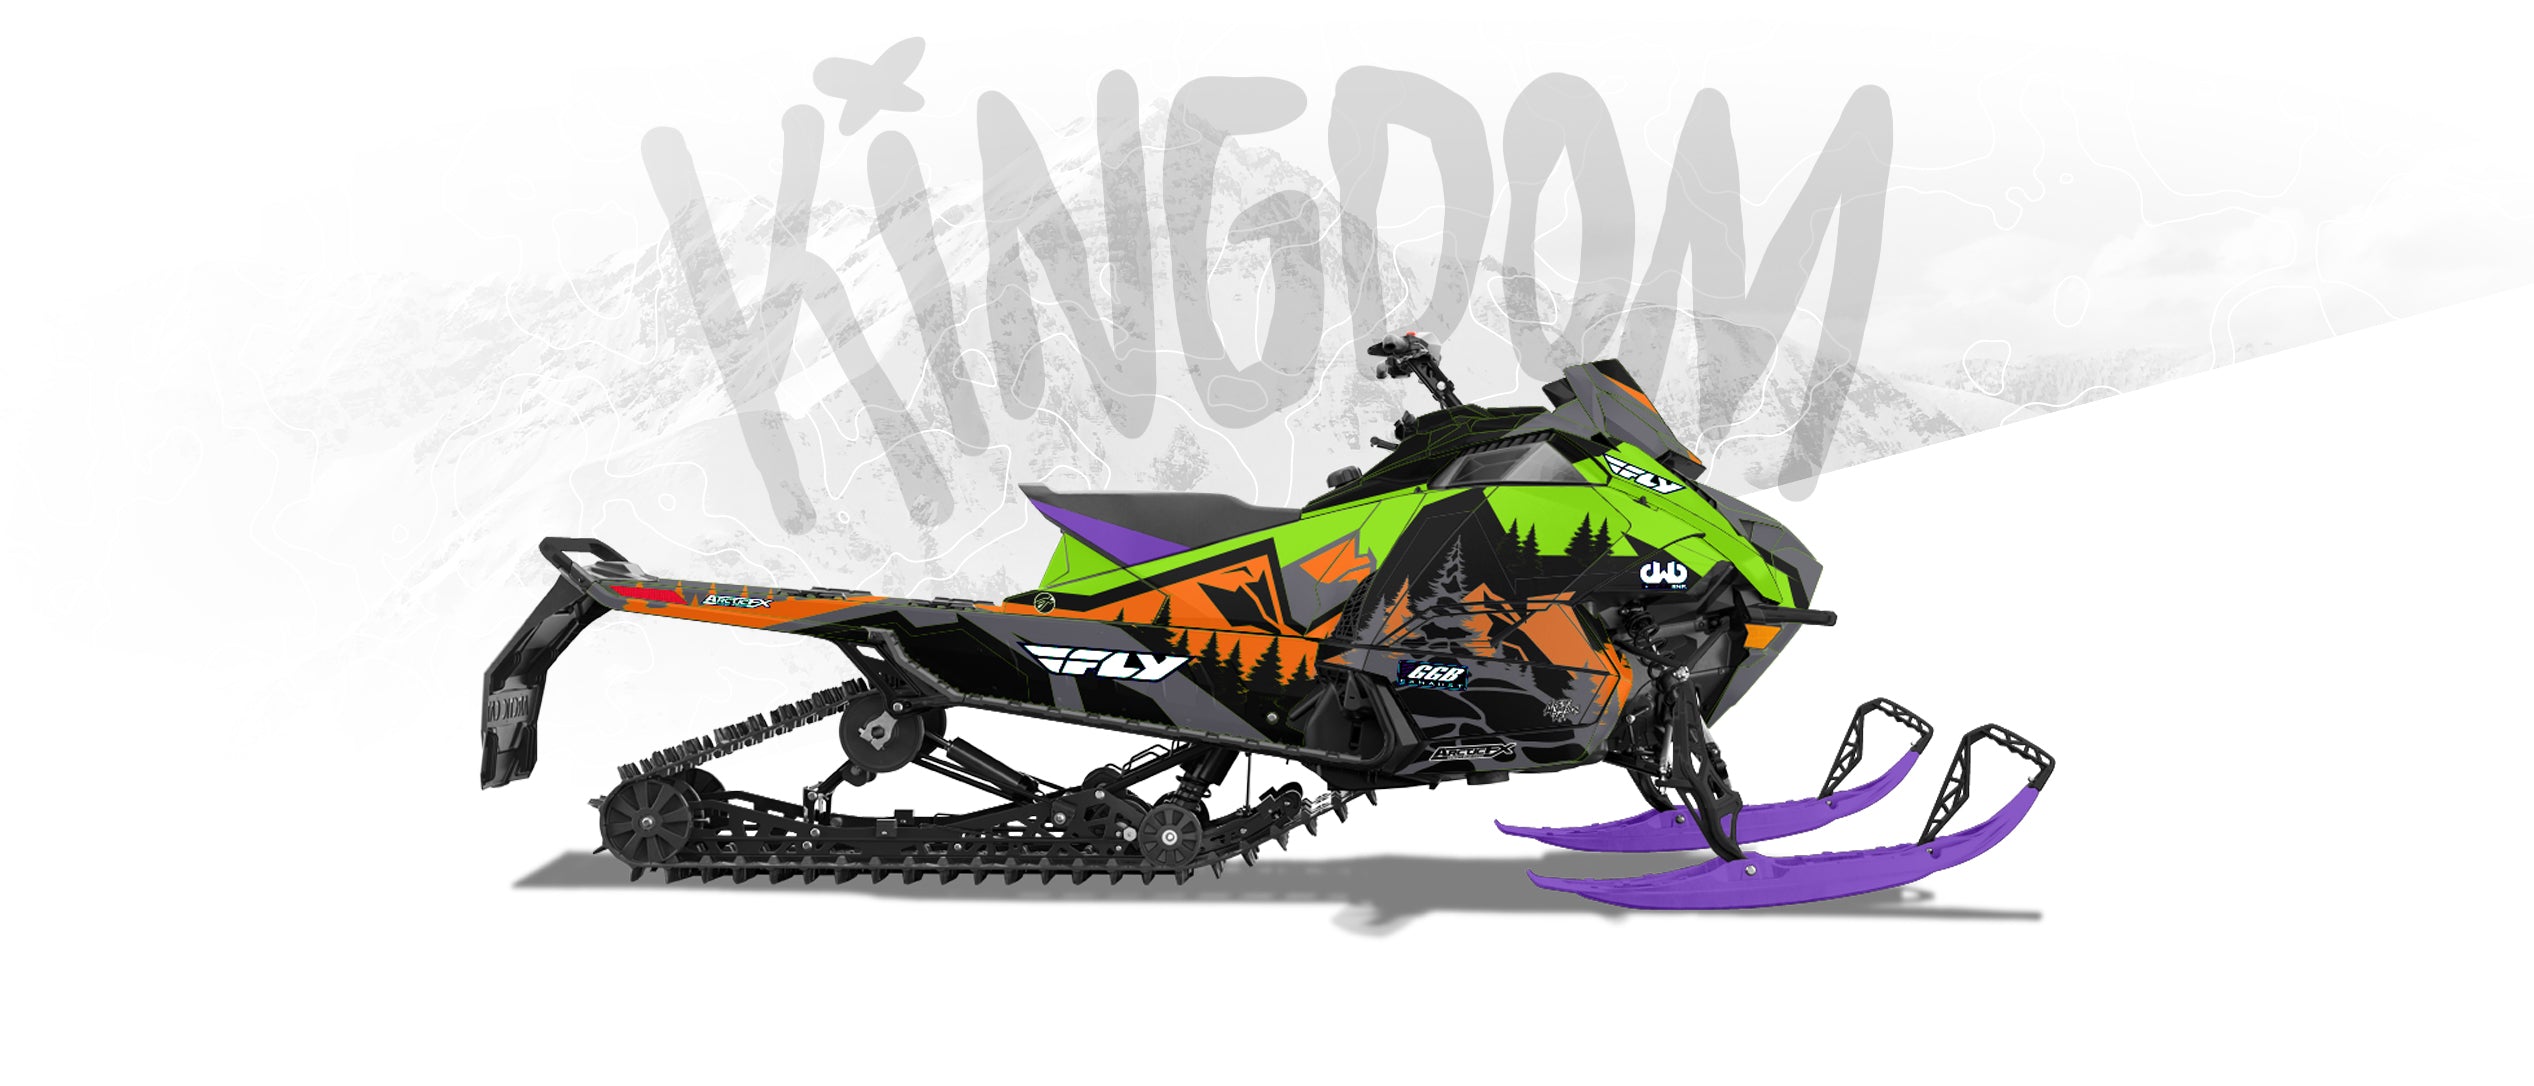 sled wrap > arctic cat > catalyst > snowmobile > backcountry wrap > arcticfx graphics